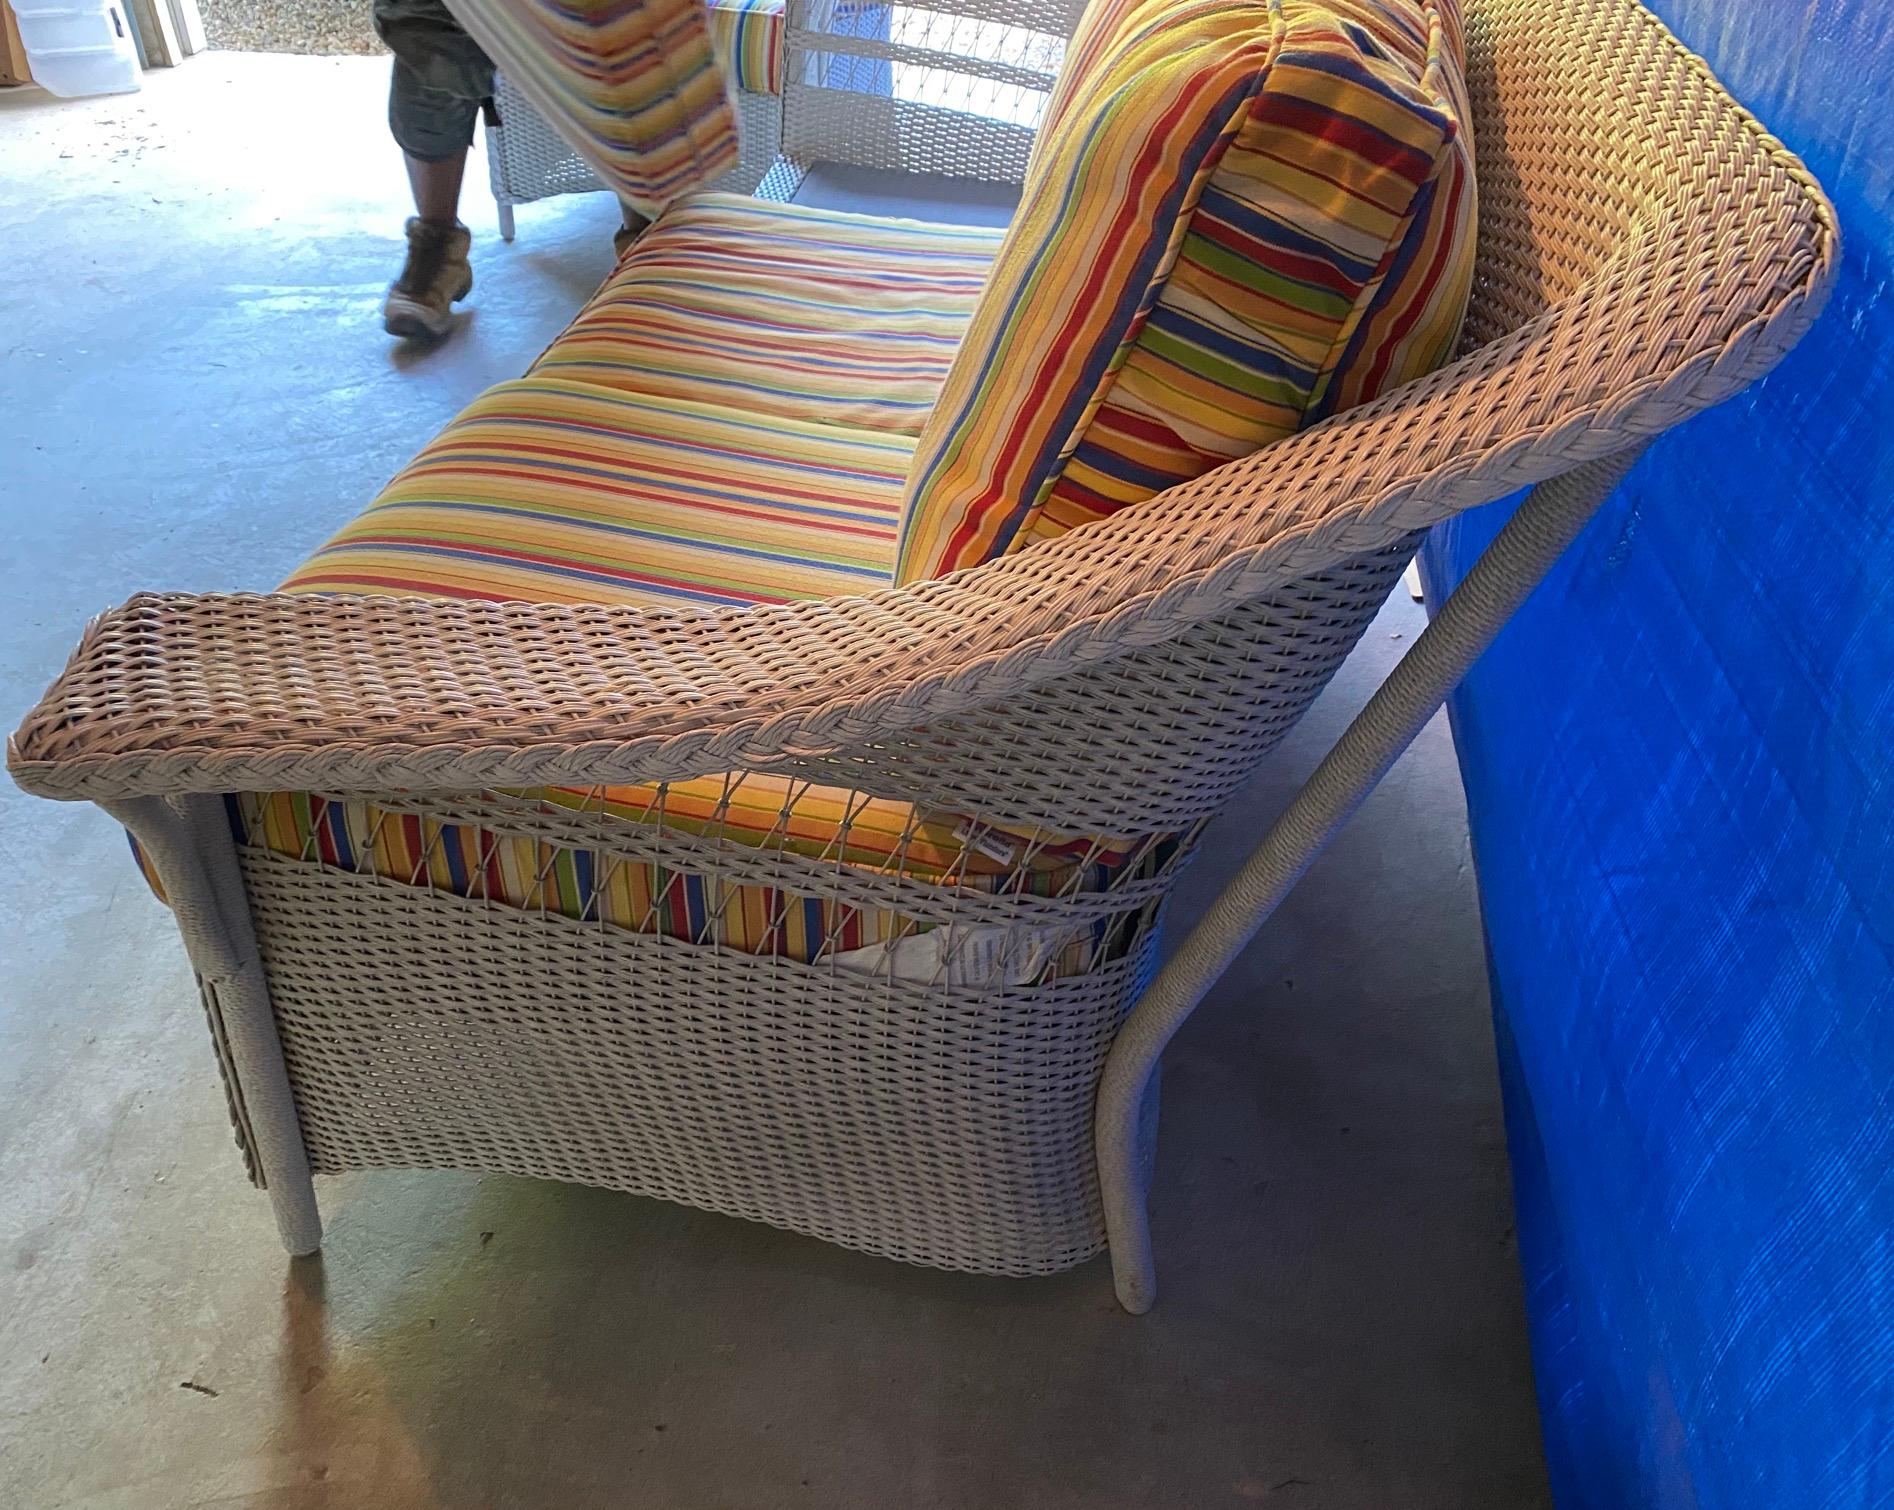 4 Piece Wicker Patio Seating Ensemble In Good Condition For Sale In Sheffield, MA